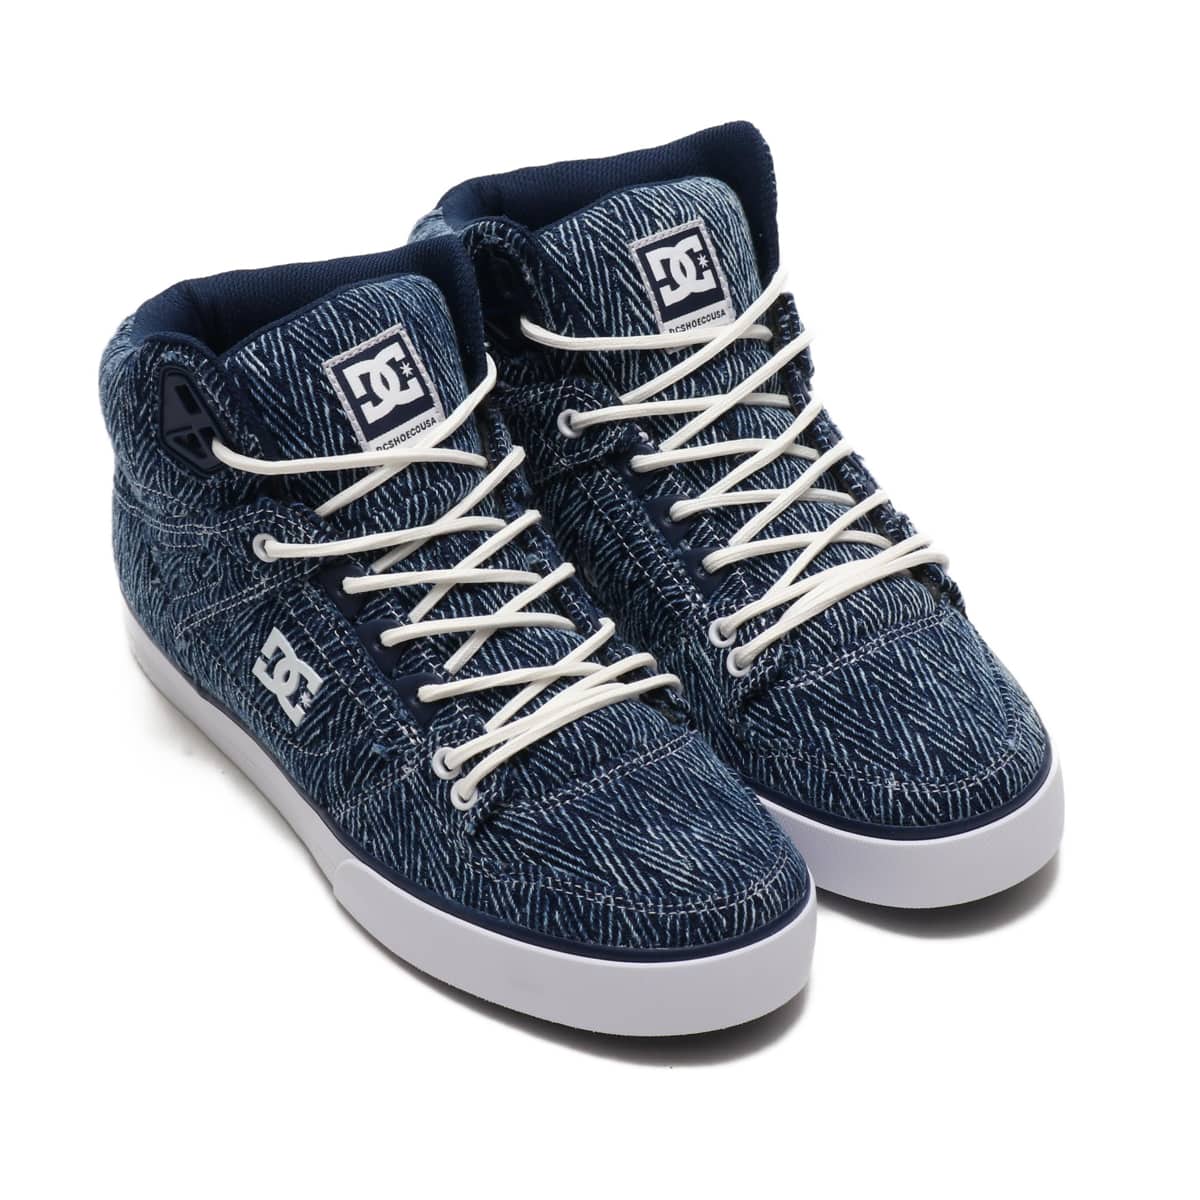 DC SHOES PURE HIGHTOP WC TX SE NAVY/WHITE 18HOI